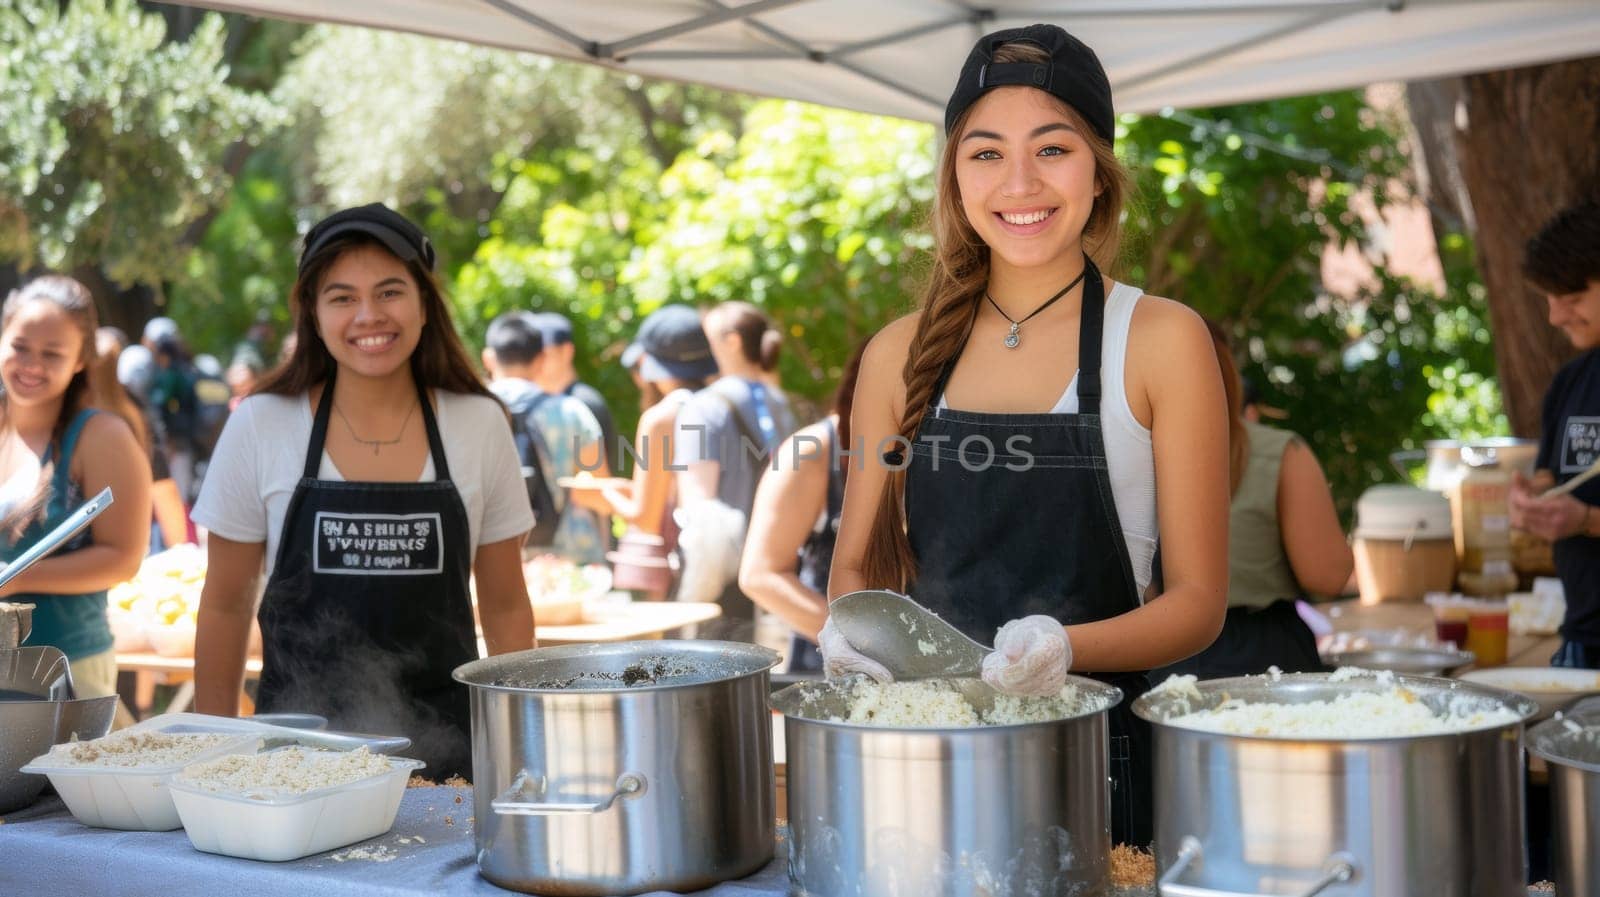 A woman in a black hat and aprons serving food at an outdoor event